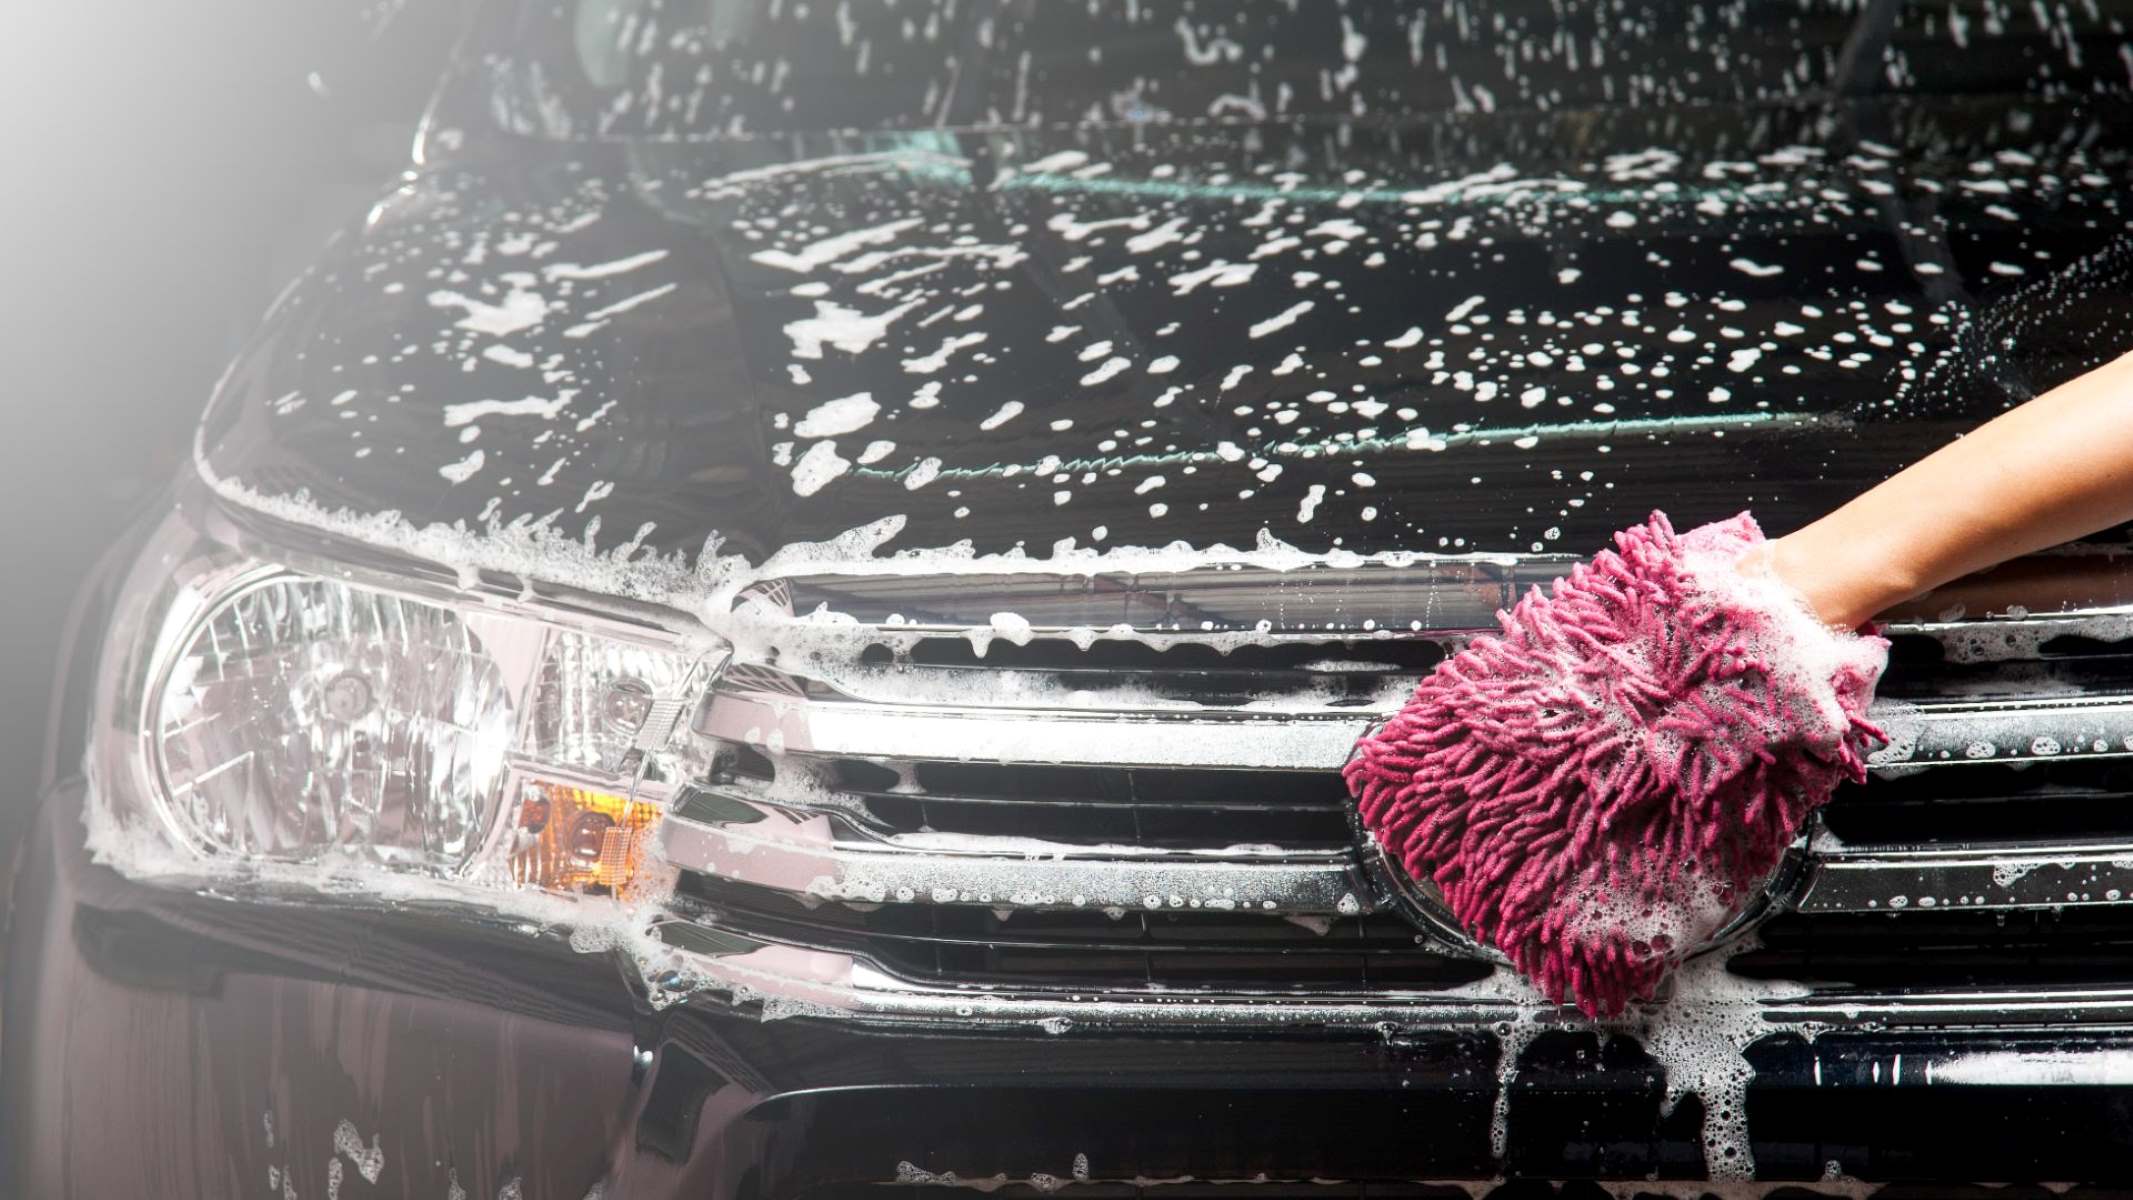 Cheap And Surprising Substitute For Car Wash Soap!